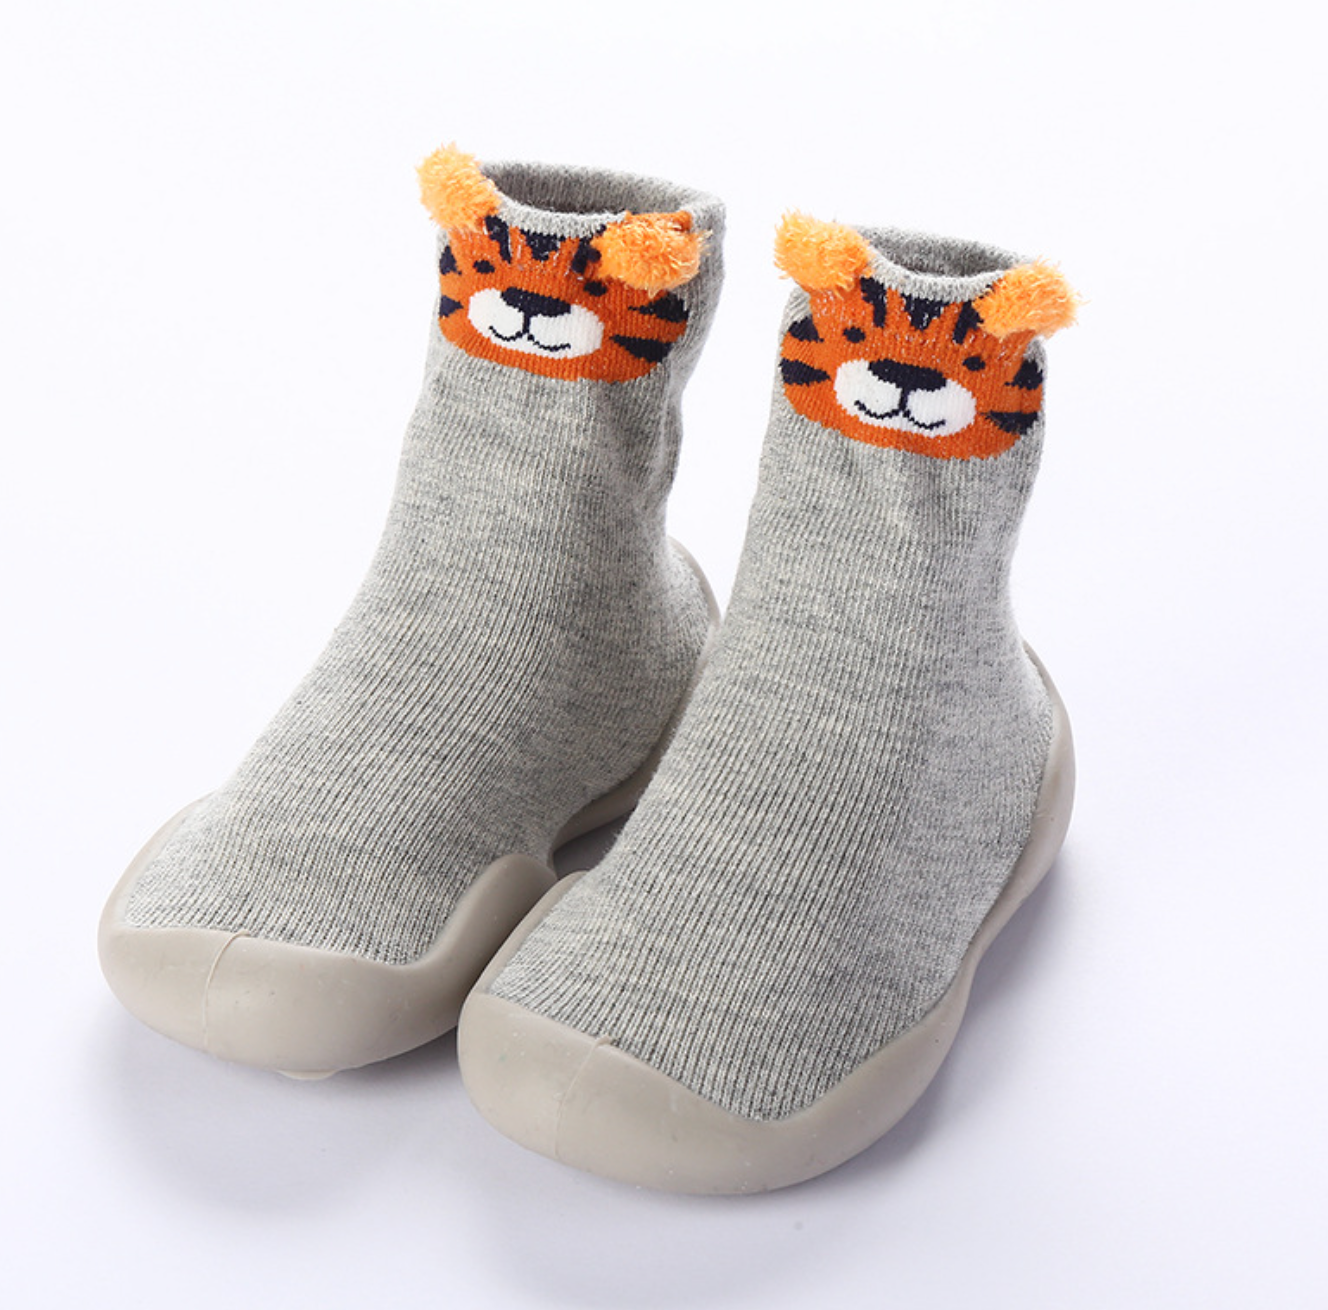 Anti-Skid Baby/Toddler Shoes Socks - Tiger in Grey (6-36 months) - Taylorson